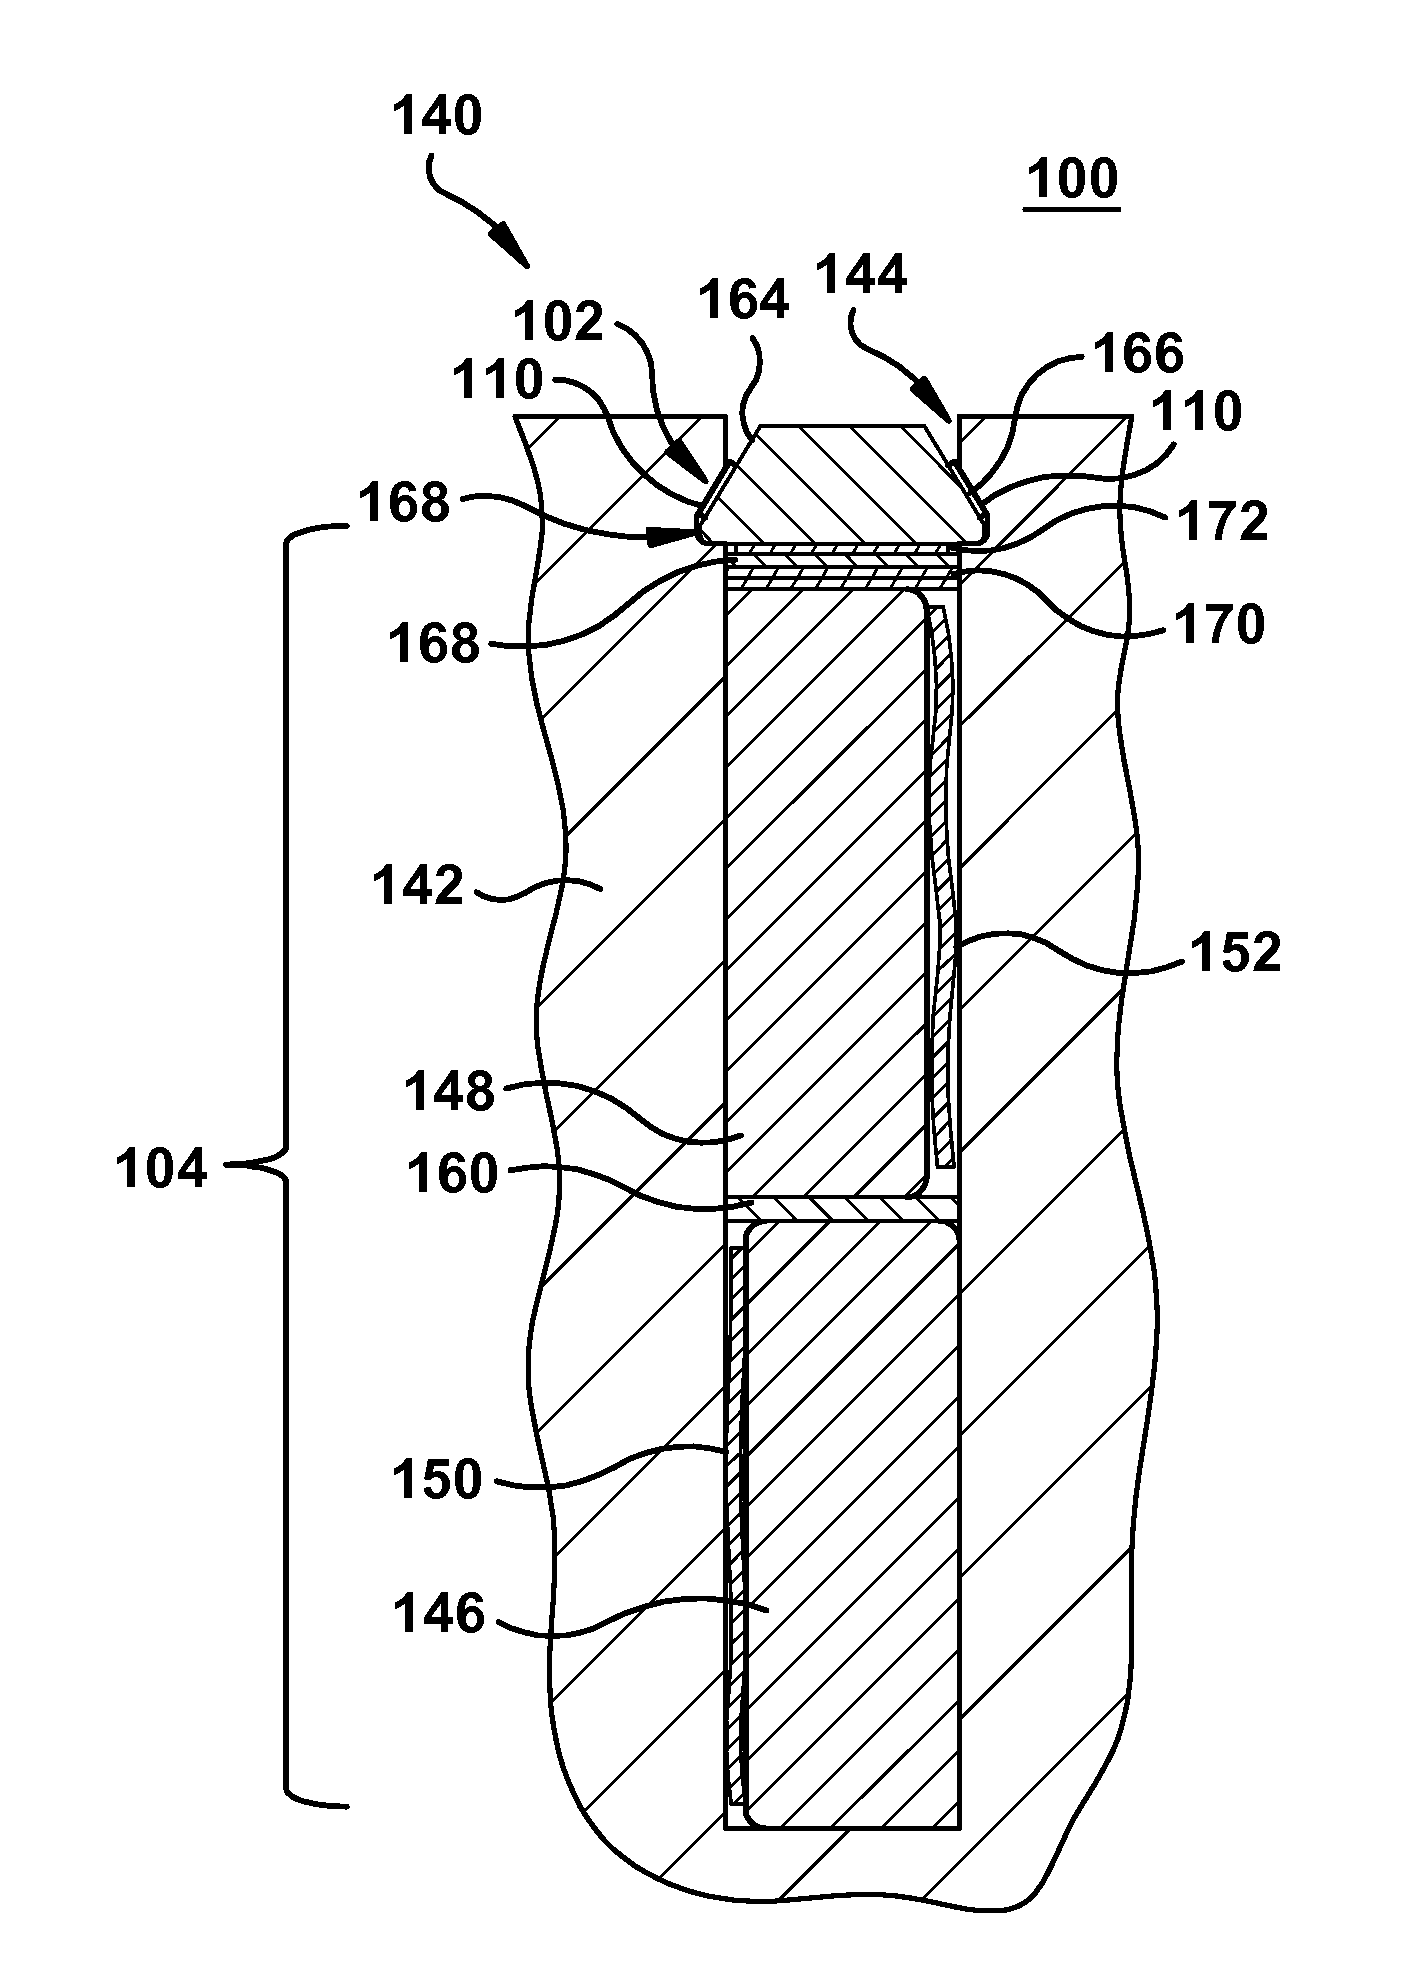 Retention assembly for stator bar using shim with stator wedge and related method